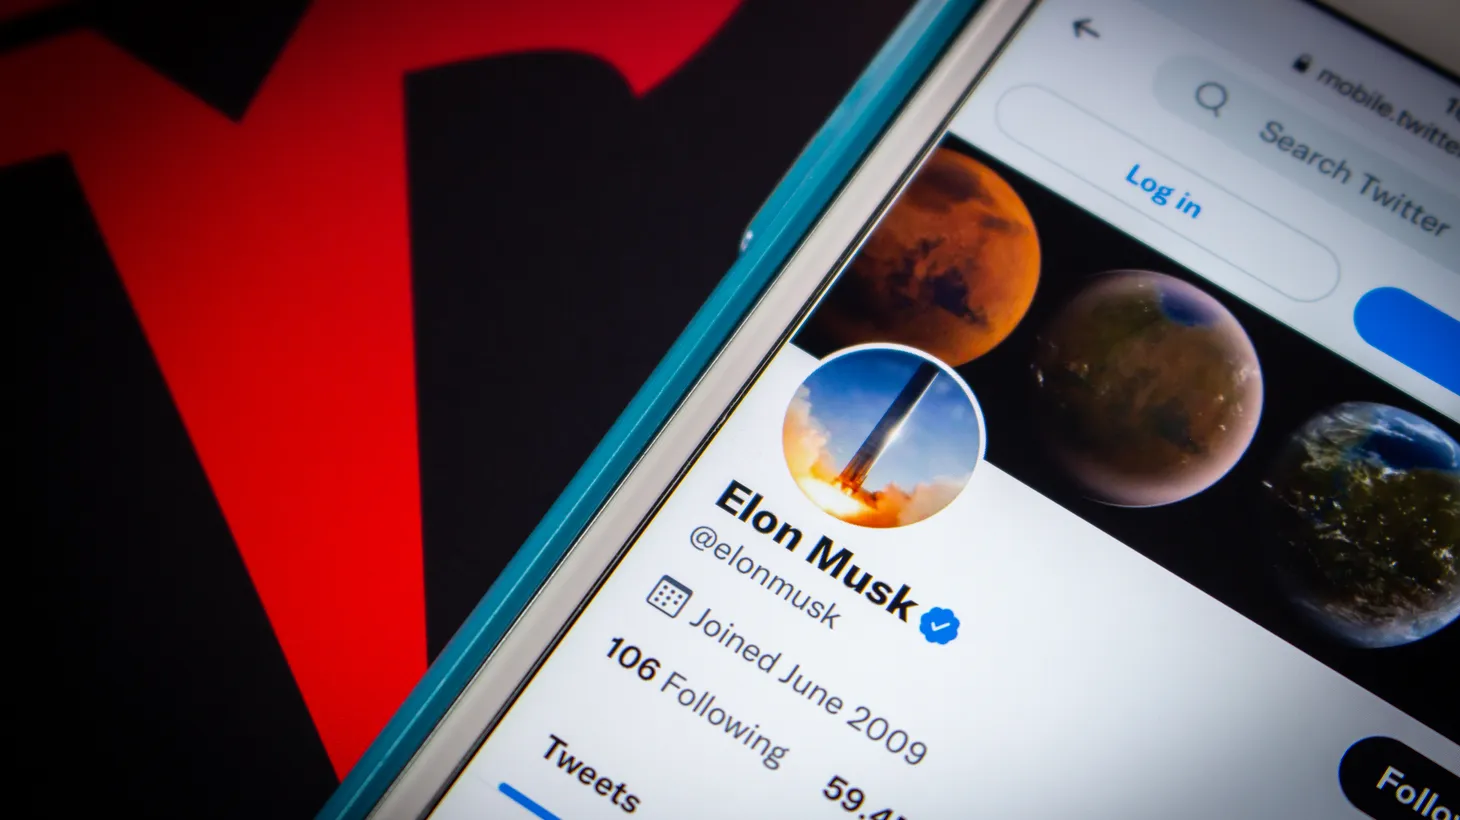 Elon Musk is welcoming back banned accounts and sharing far-right conspiracy theories on Twitter.